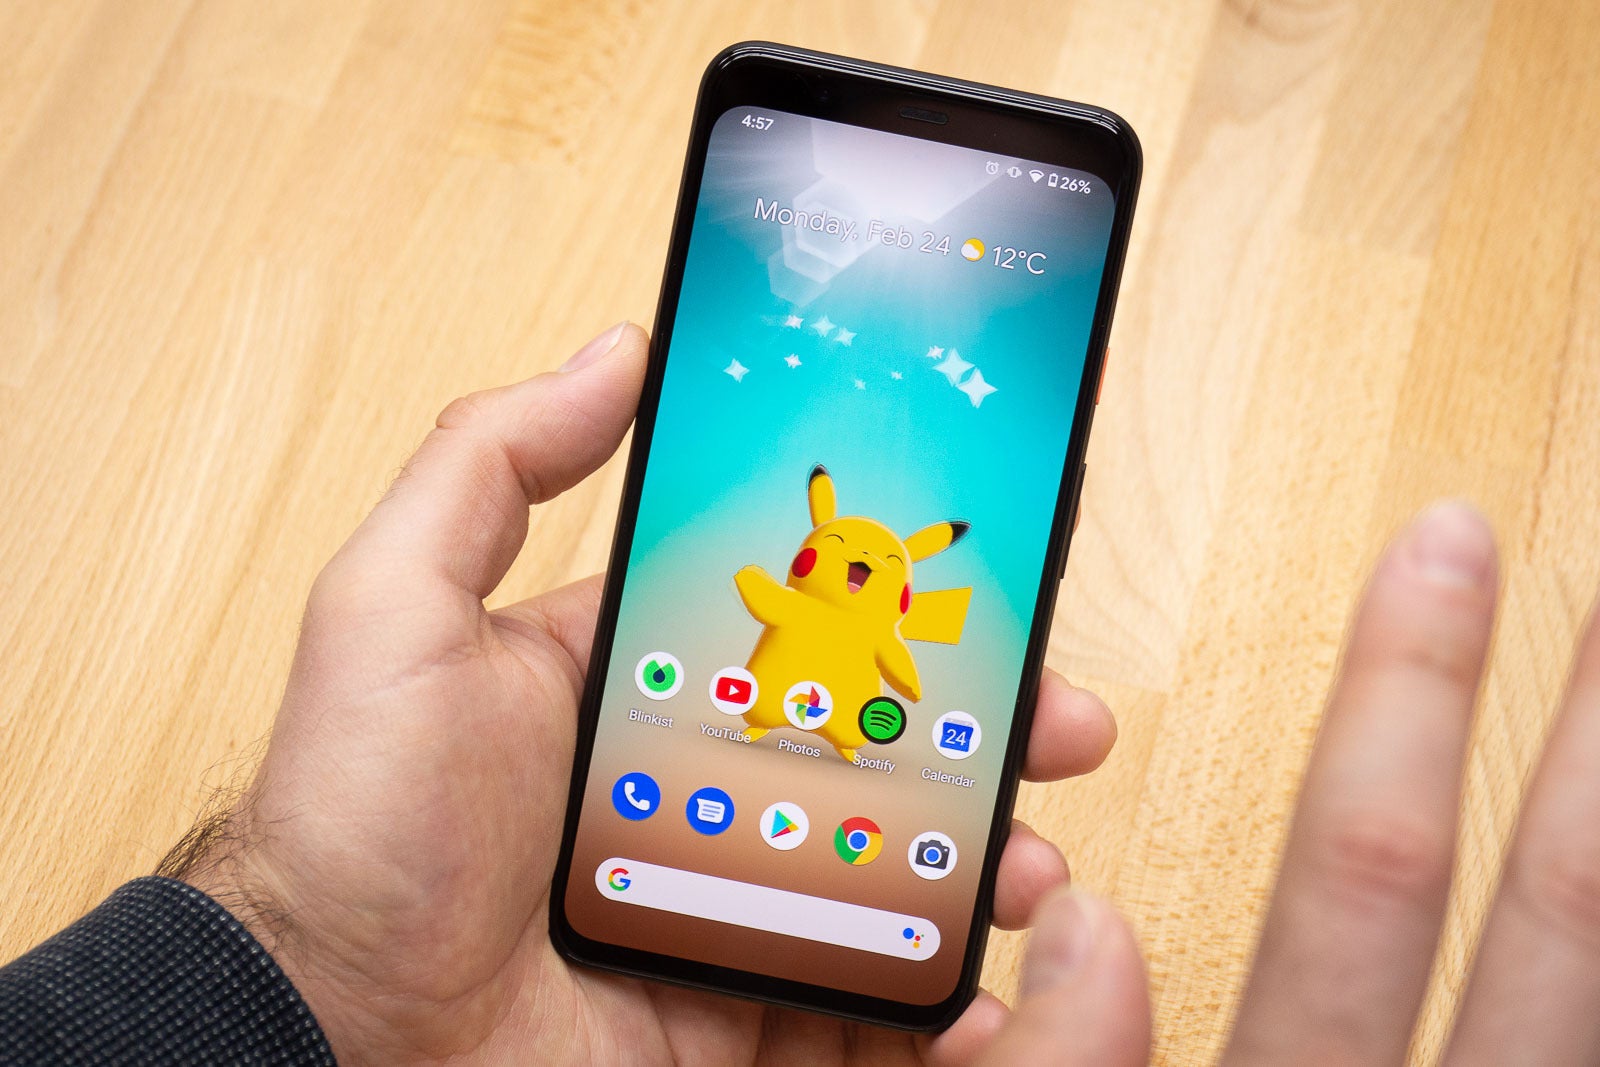 The best use for Space-age tech is not waving at Pikachu - Google Pixel 4 XL review 4 months later: is it worth getting one in 2020?